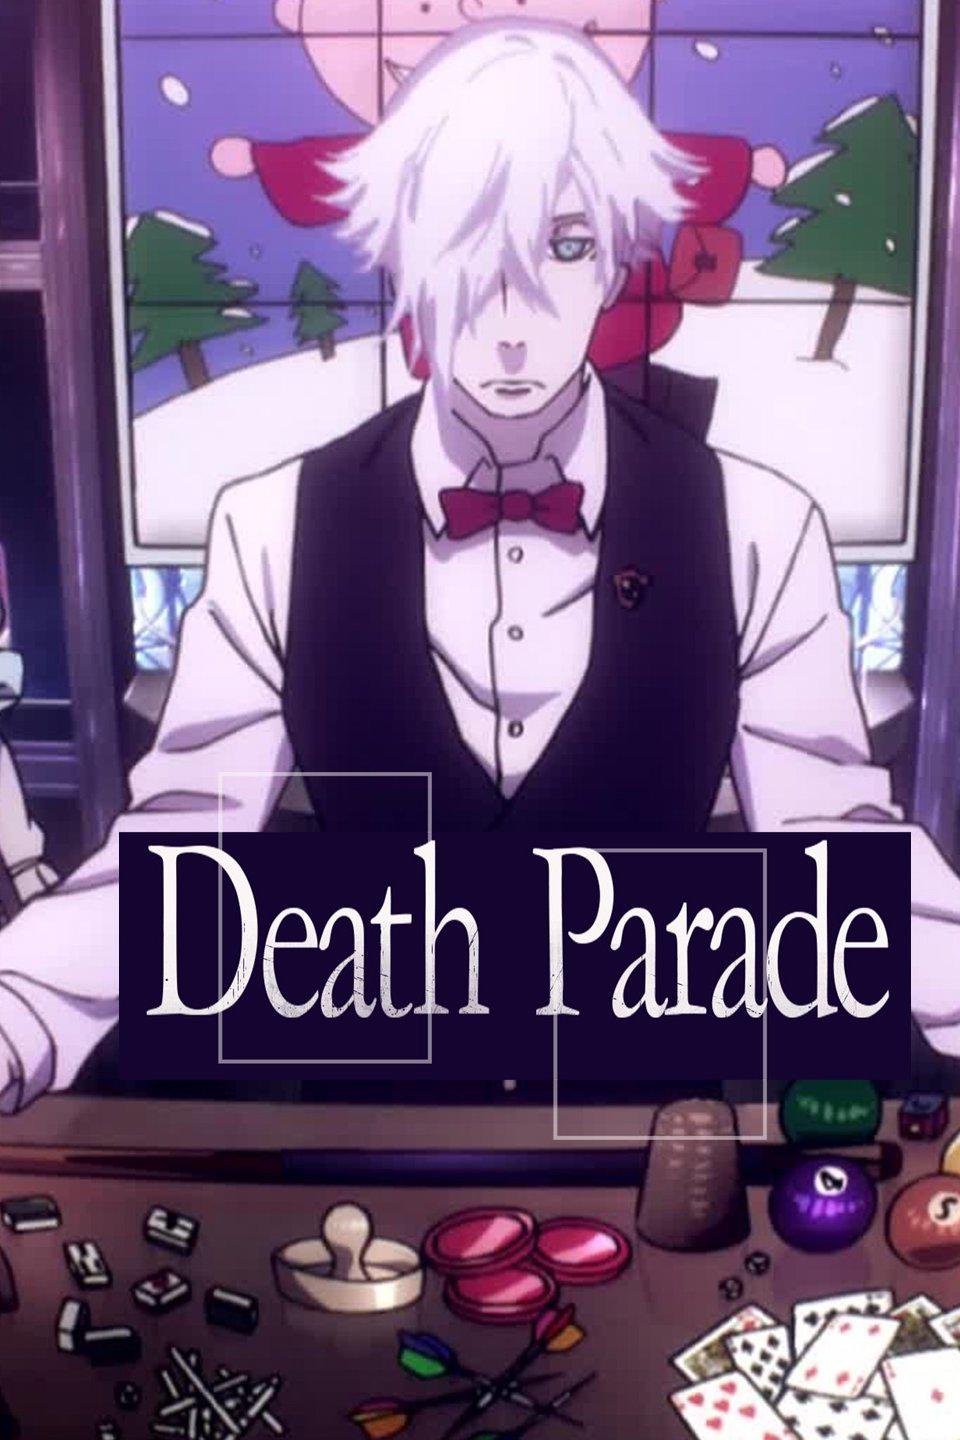 Death Parade (MMT): United States daily TV audience insights for smarter  content decisions - Parrot Analytics